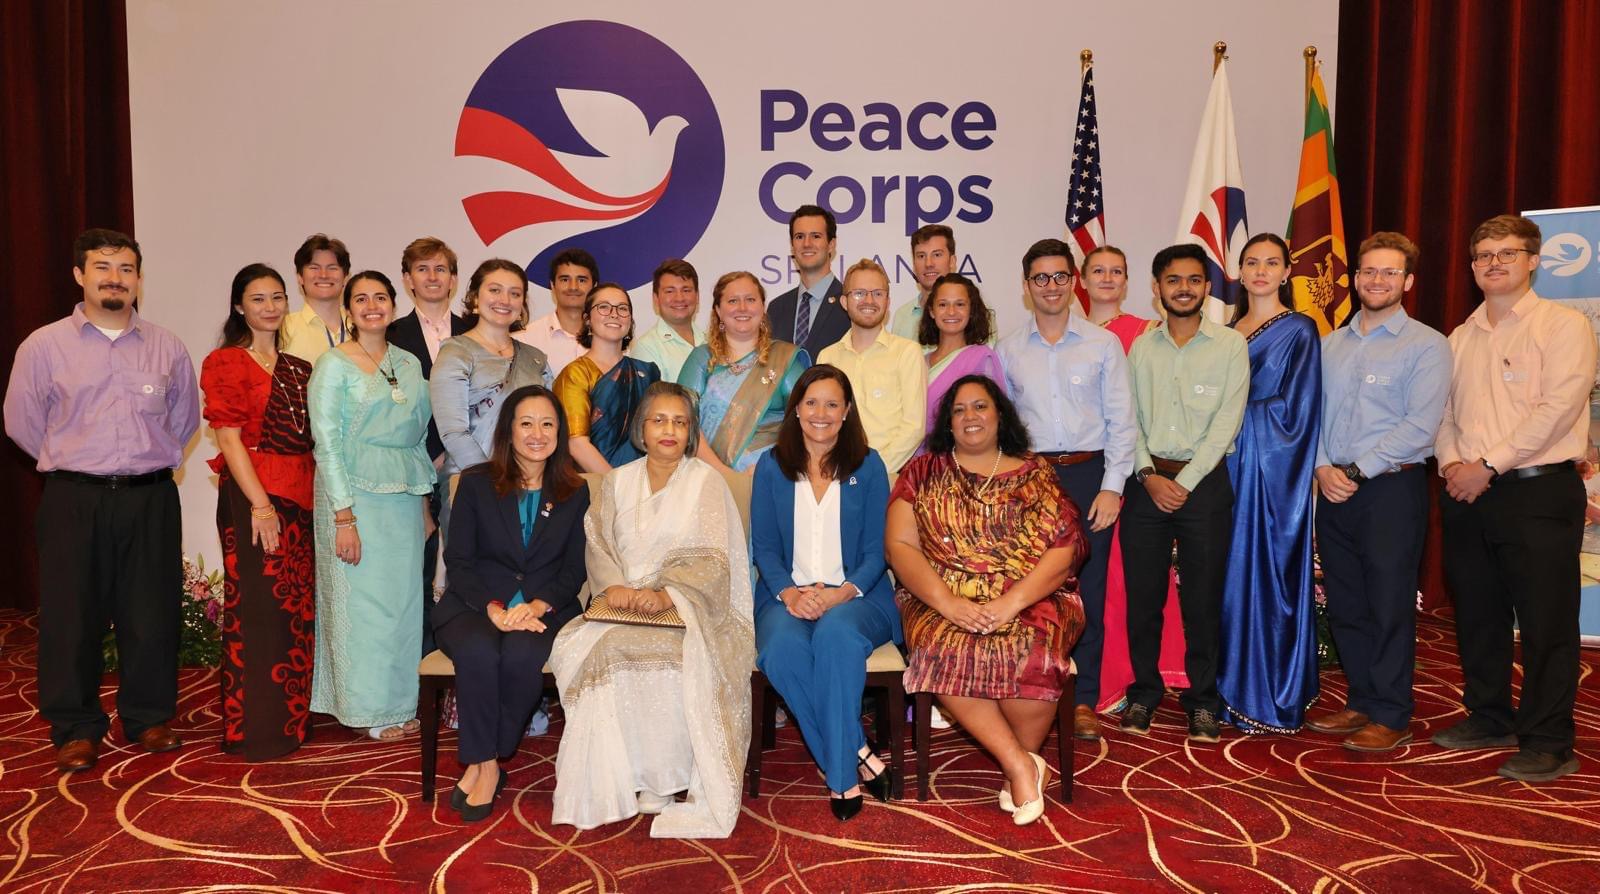 A group of people in dressy clothes in front of a Peace Corp banner and three flags